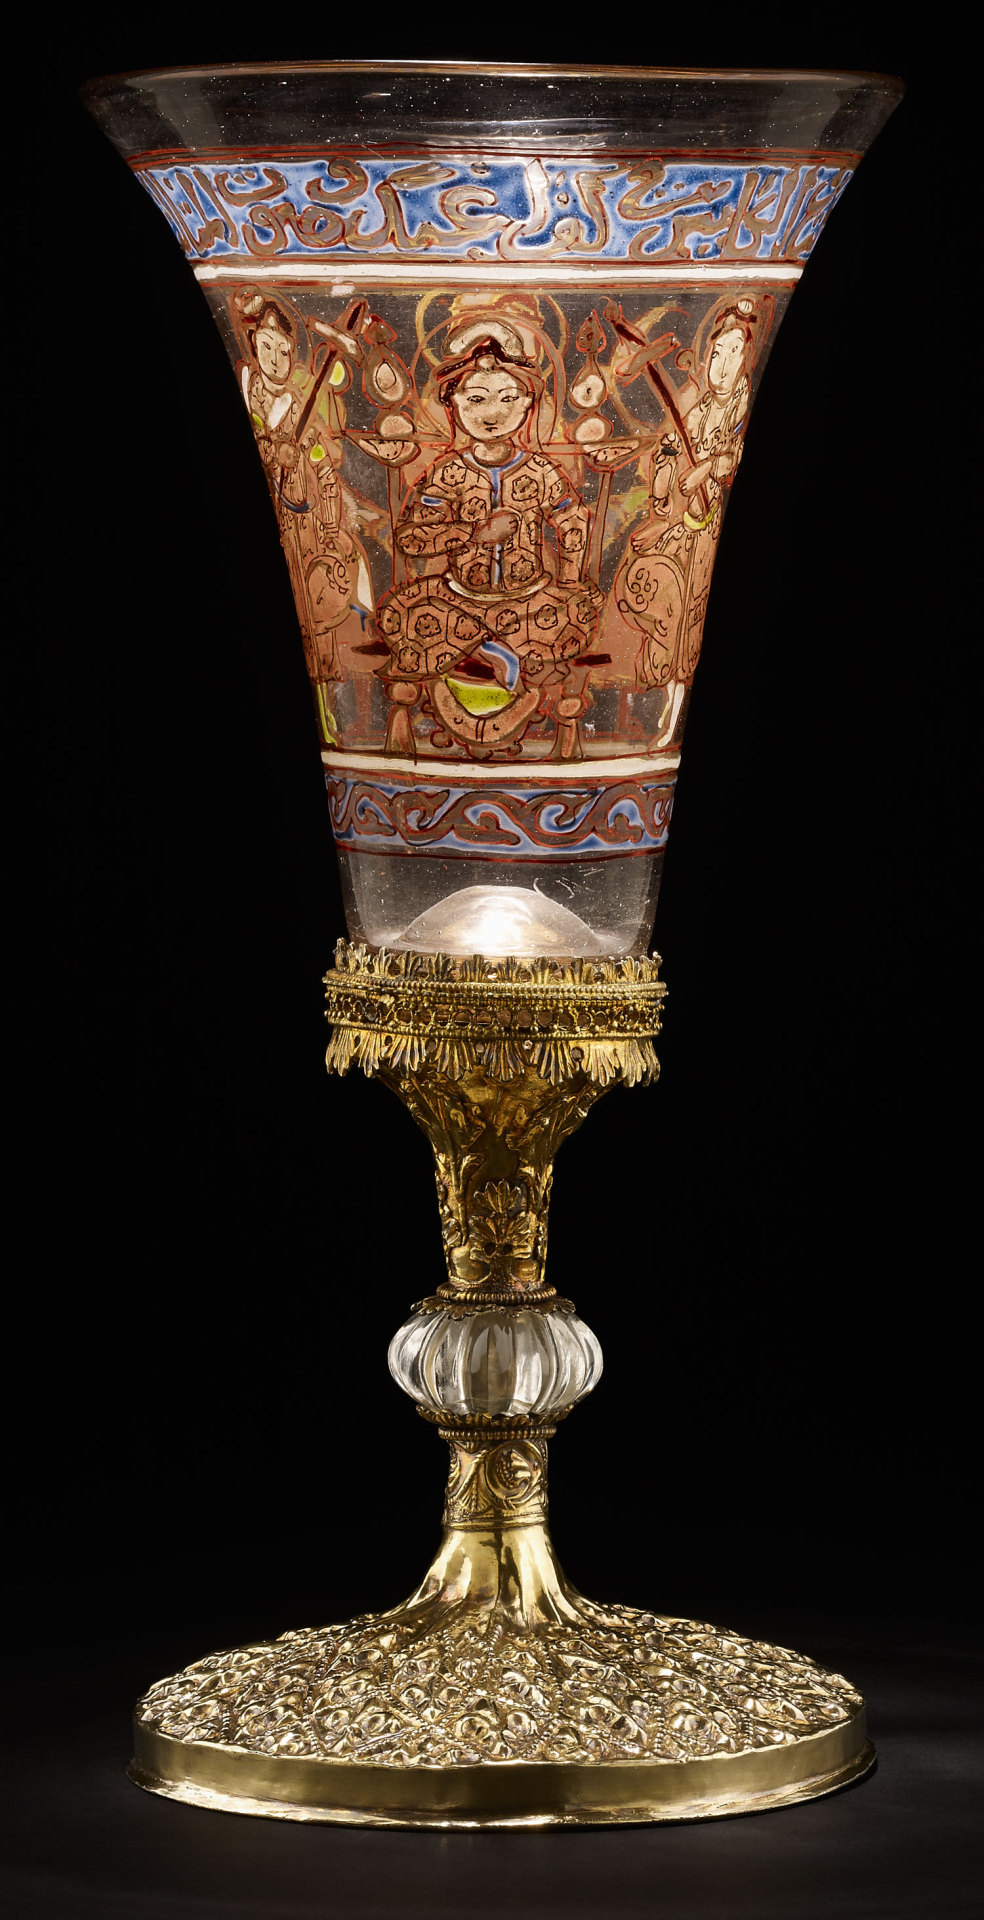 British Museum — The Palmer Cup